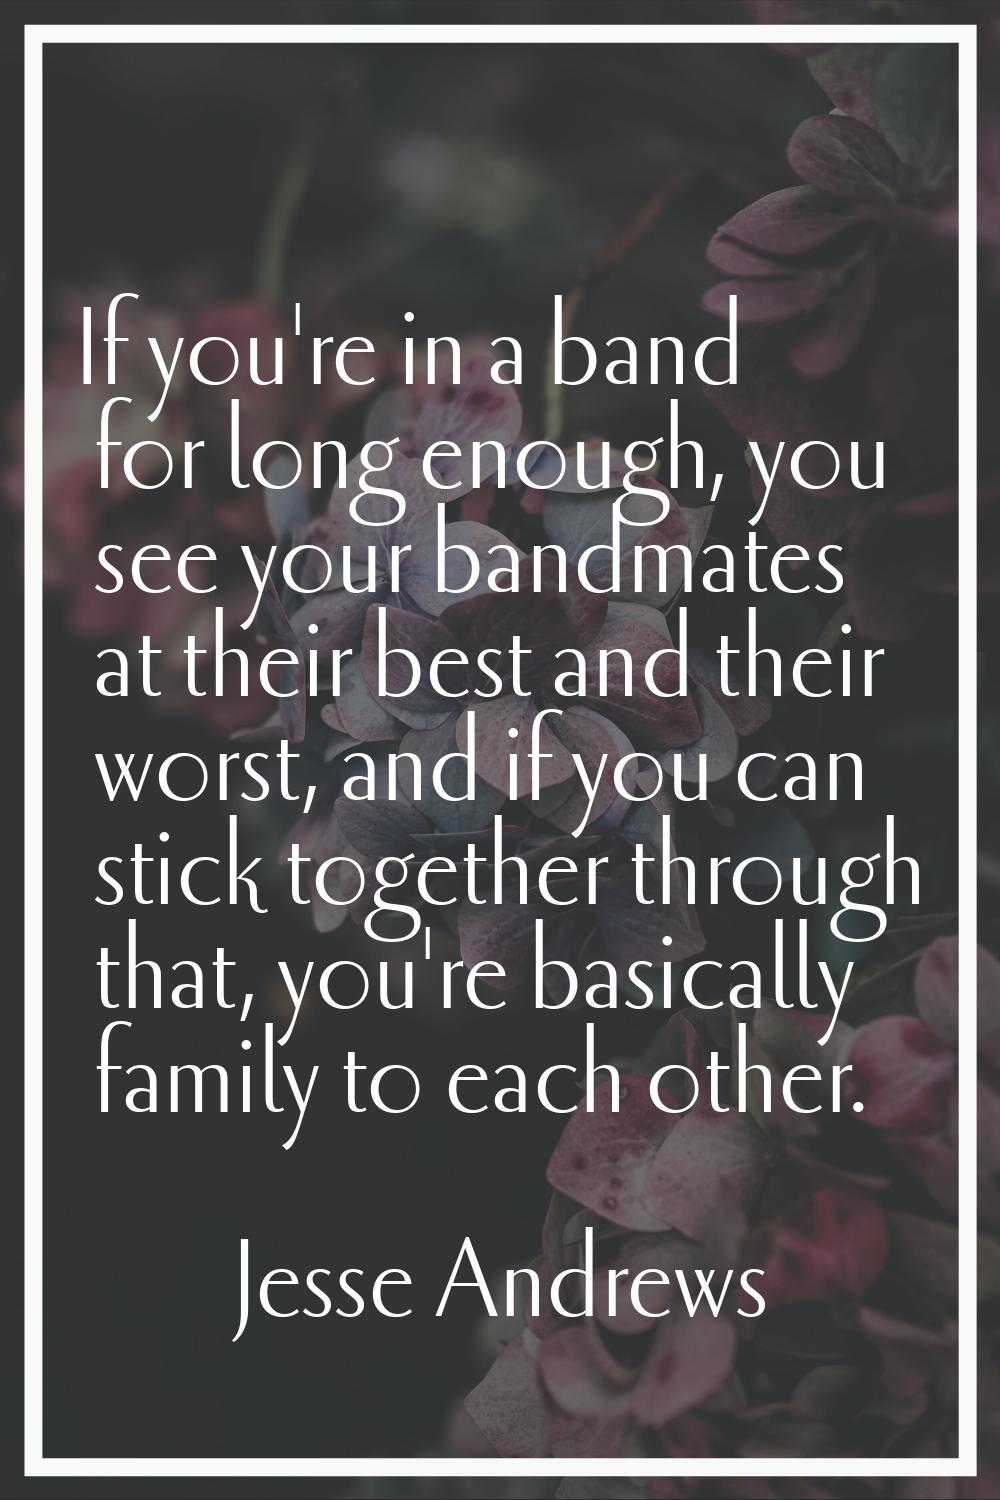 If you're in a band for long enough, you see your bandmates at their best and their worst, and if y